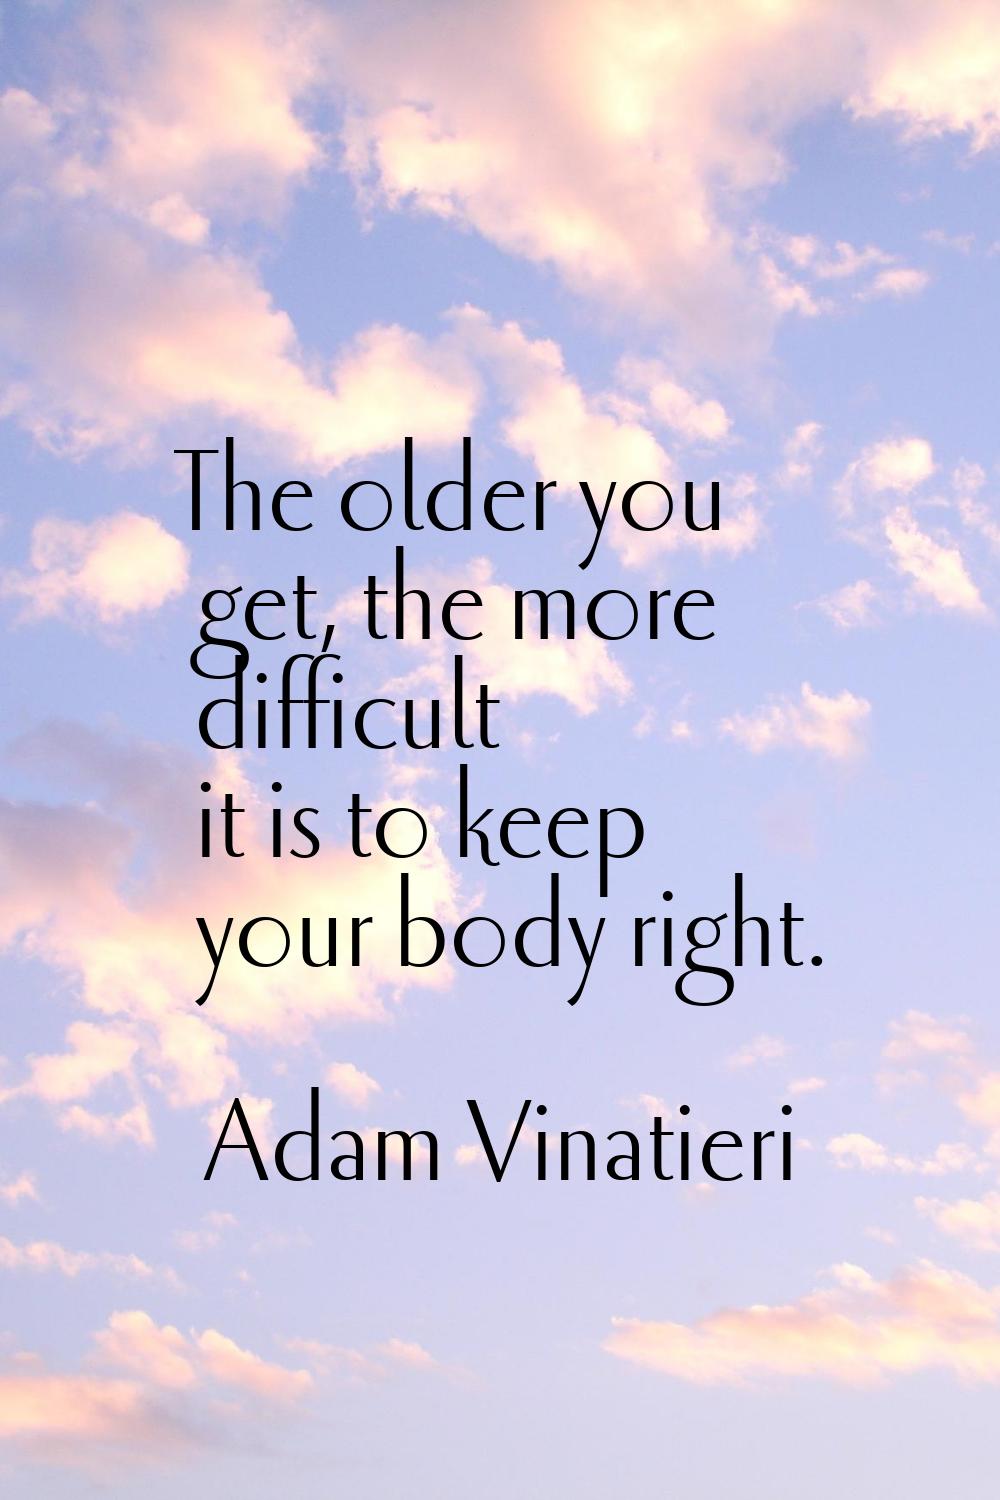 The older you get, the more difficult it is to keep your body right.